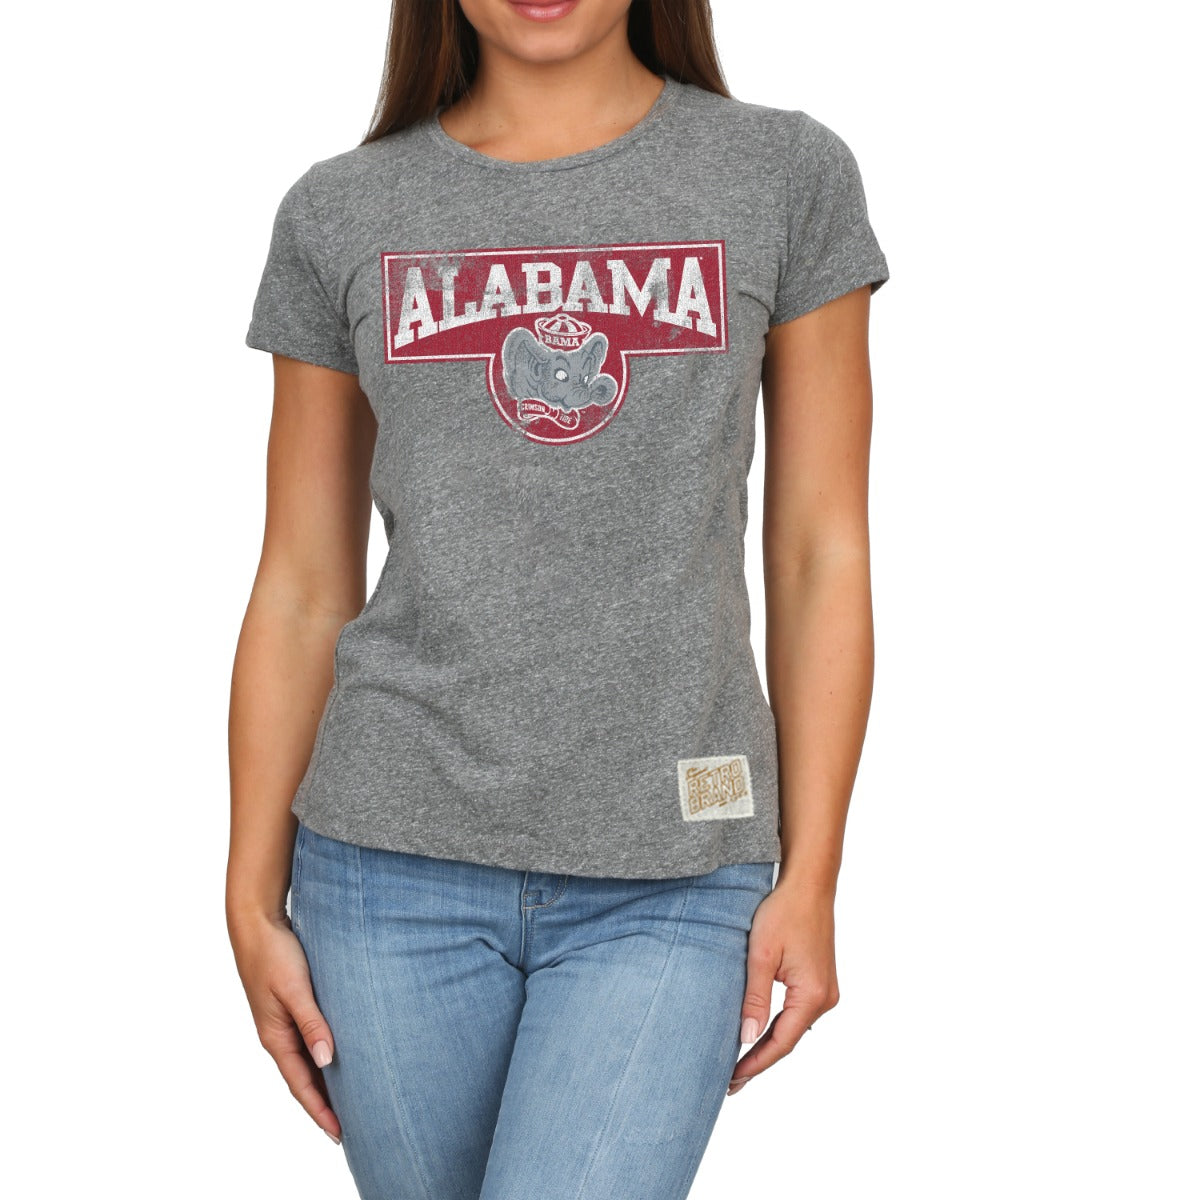 Alabama arch logo design on red background on our tri-blend gray women's short sleeve crew neck tee